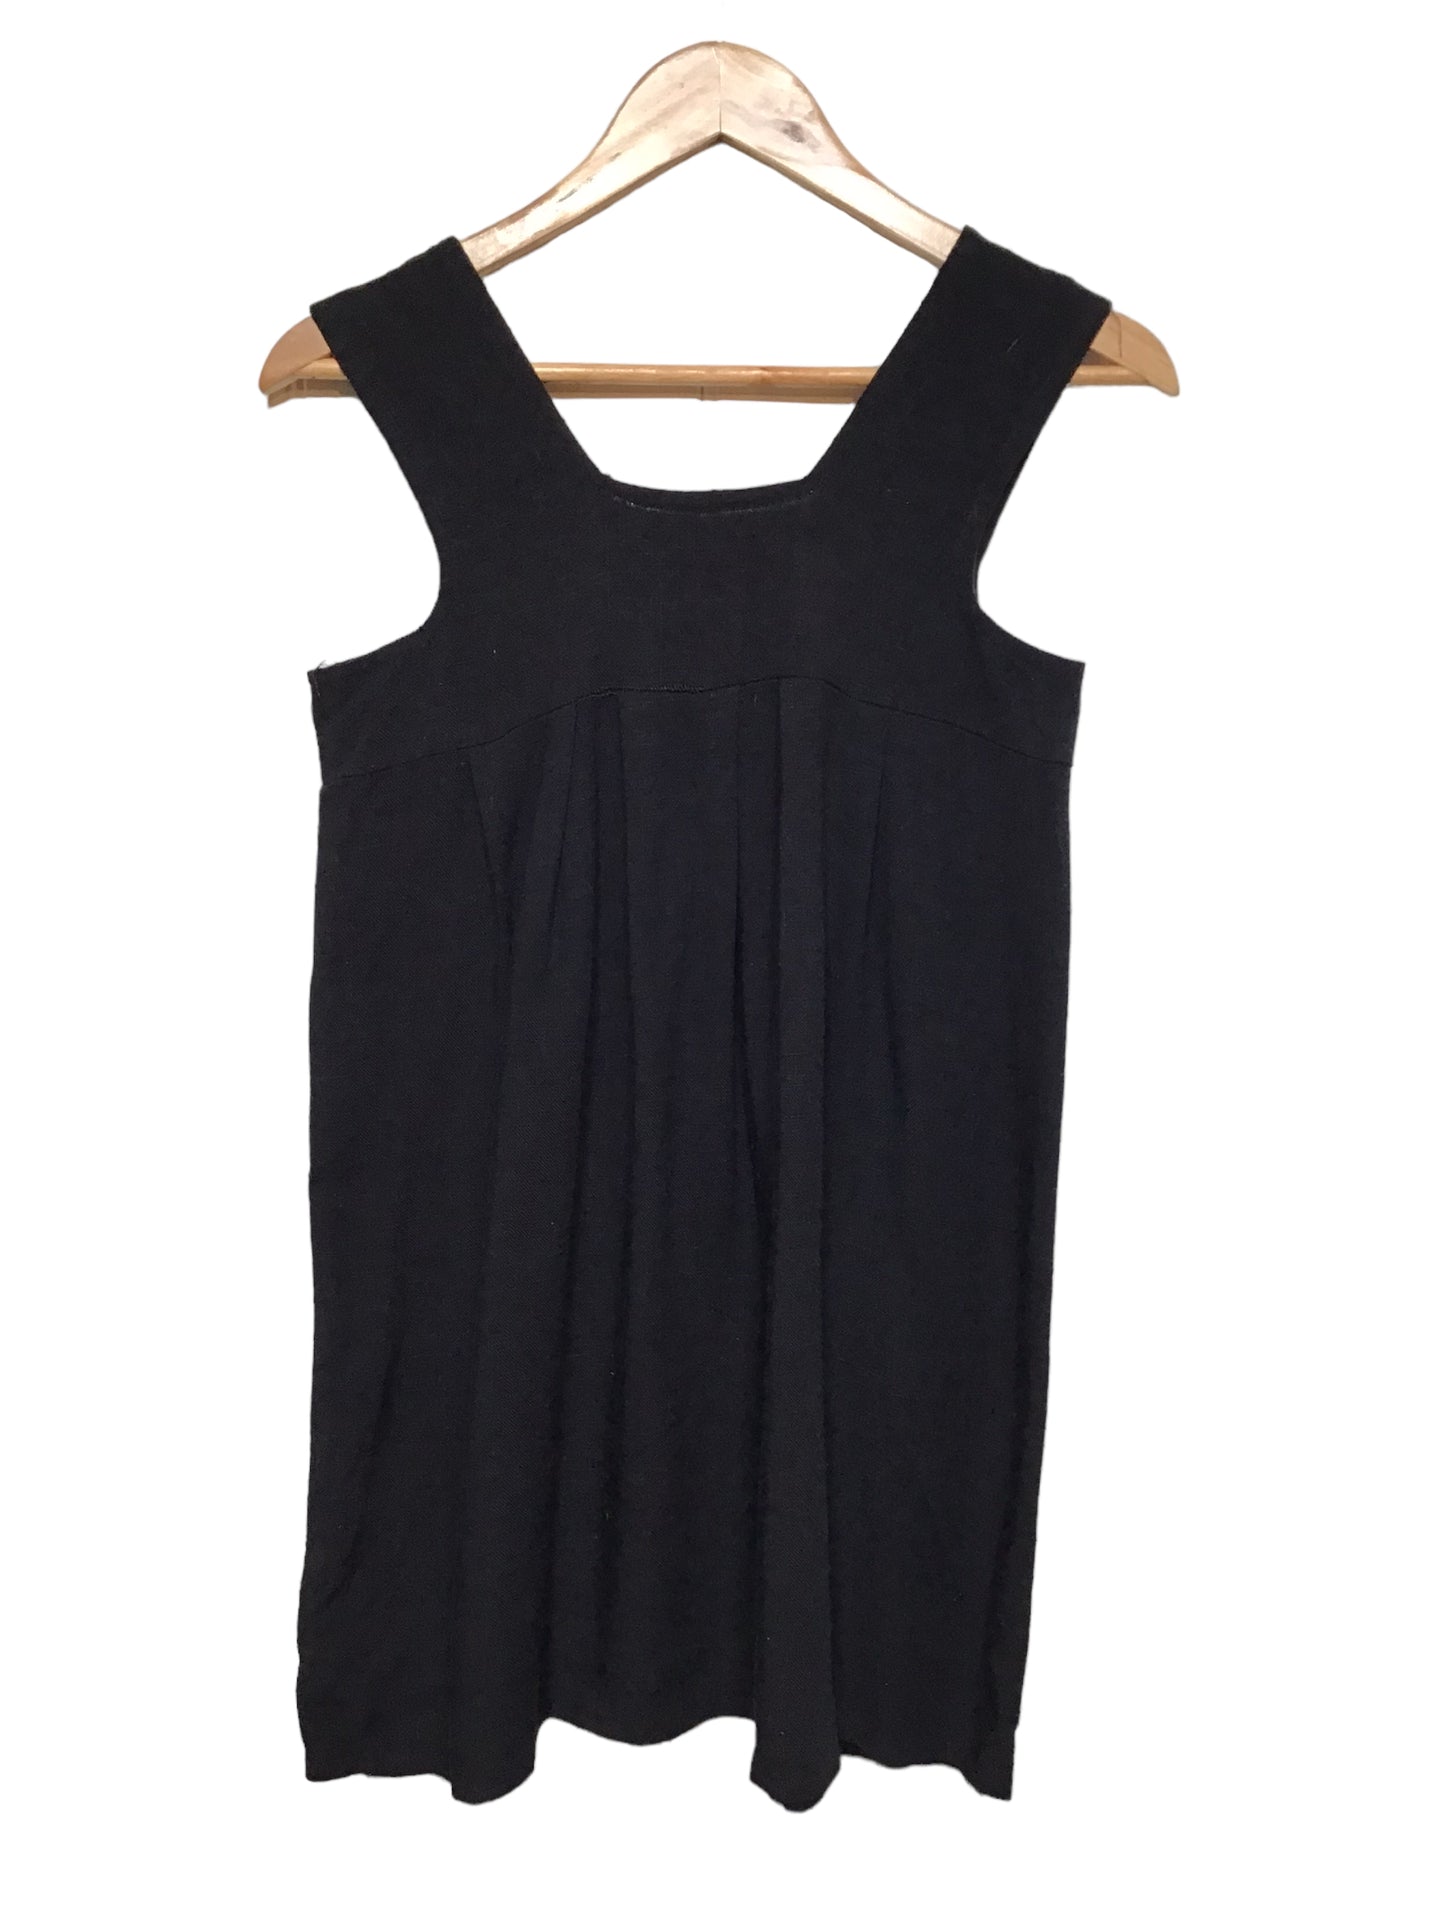 Floaty Black Top (Size S)